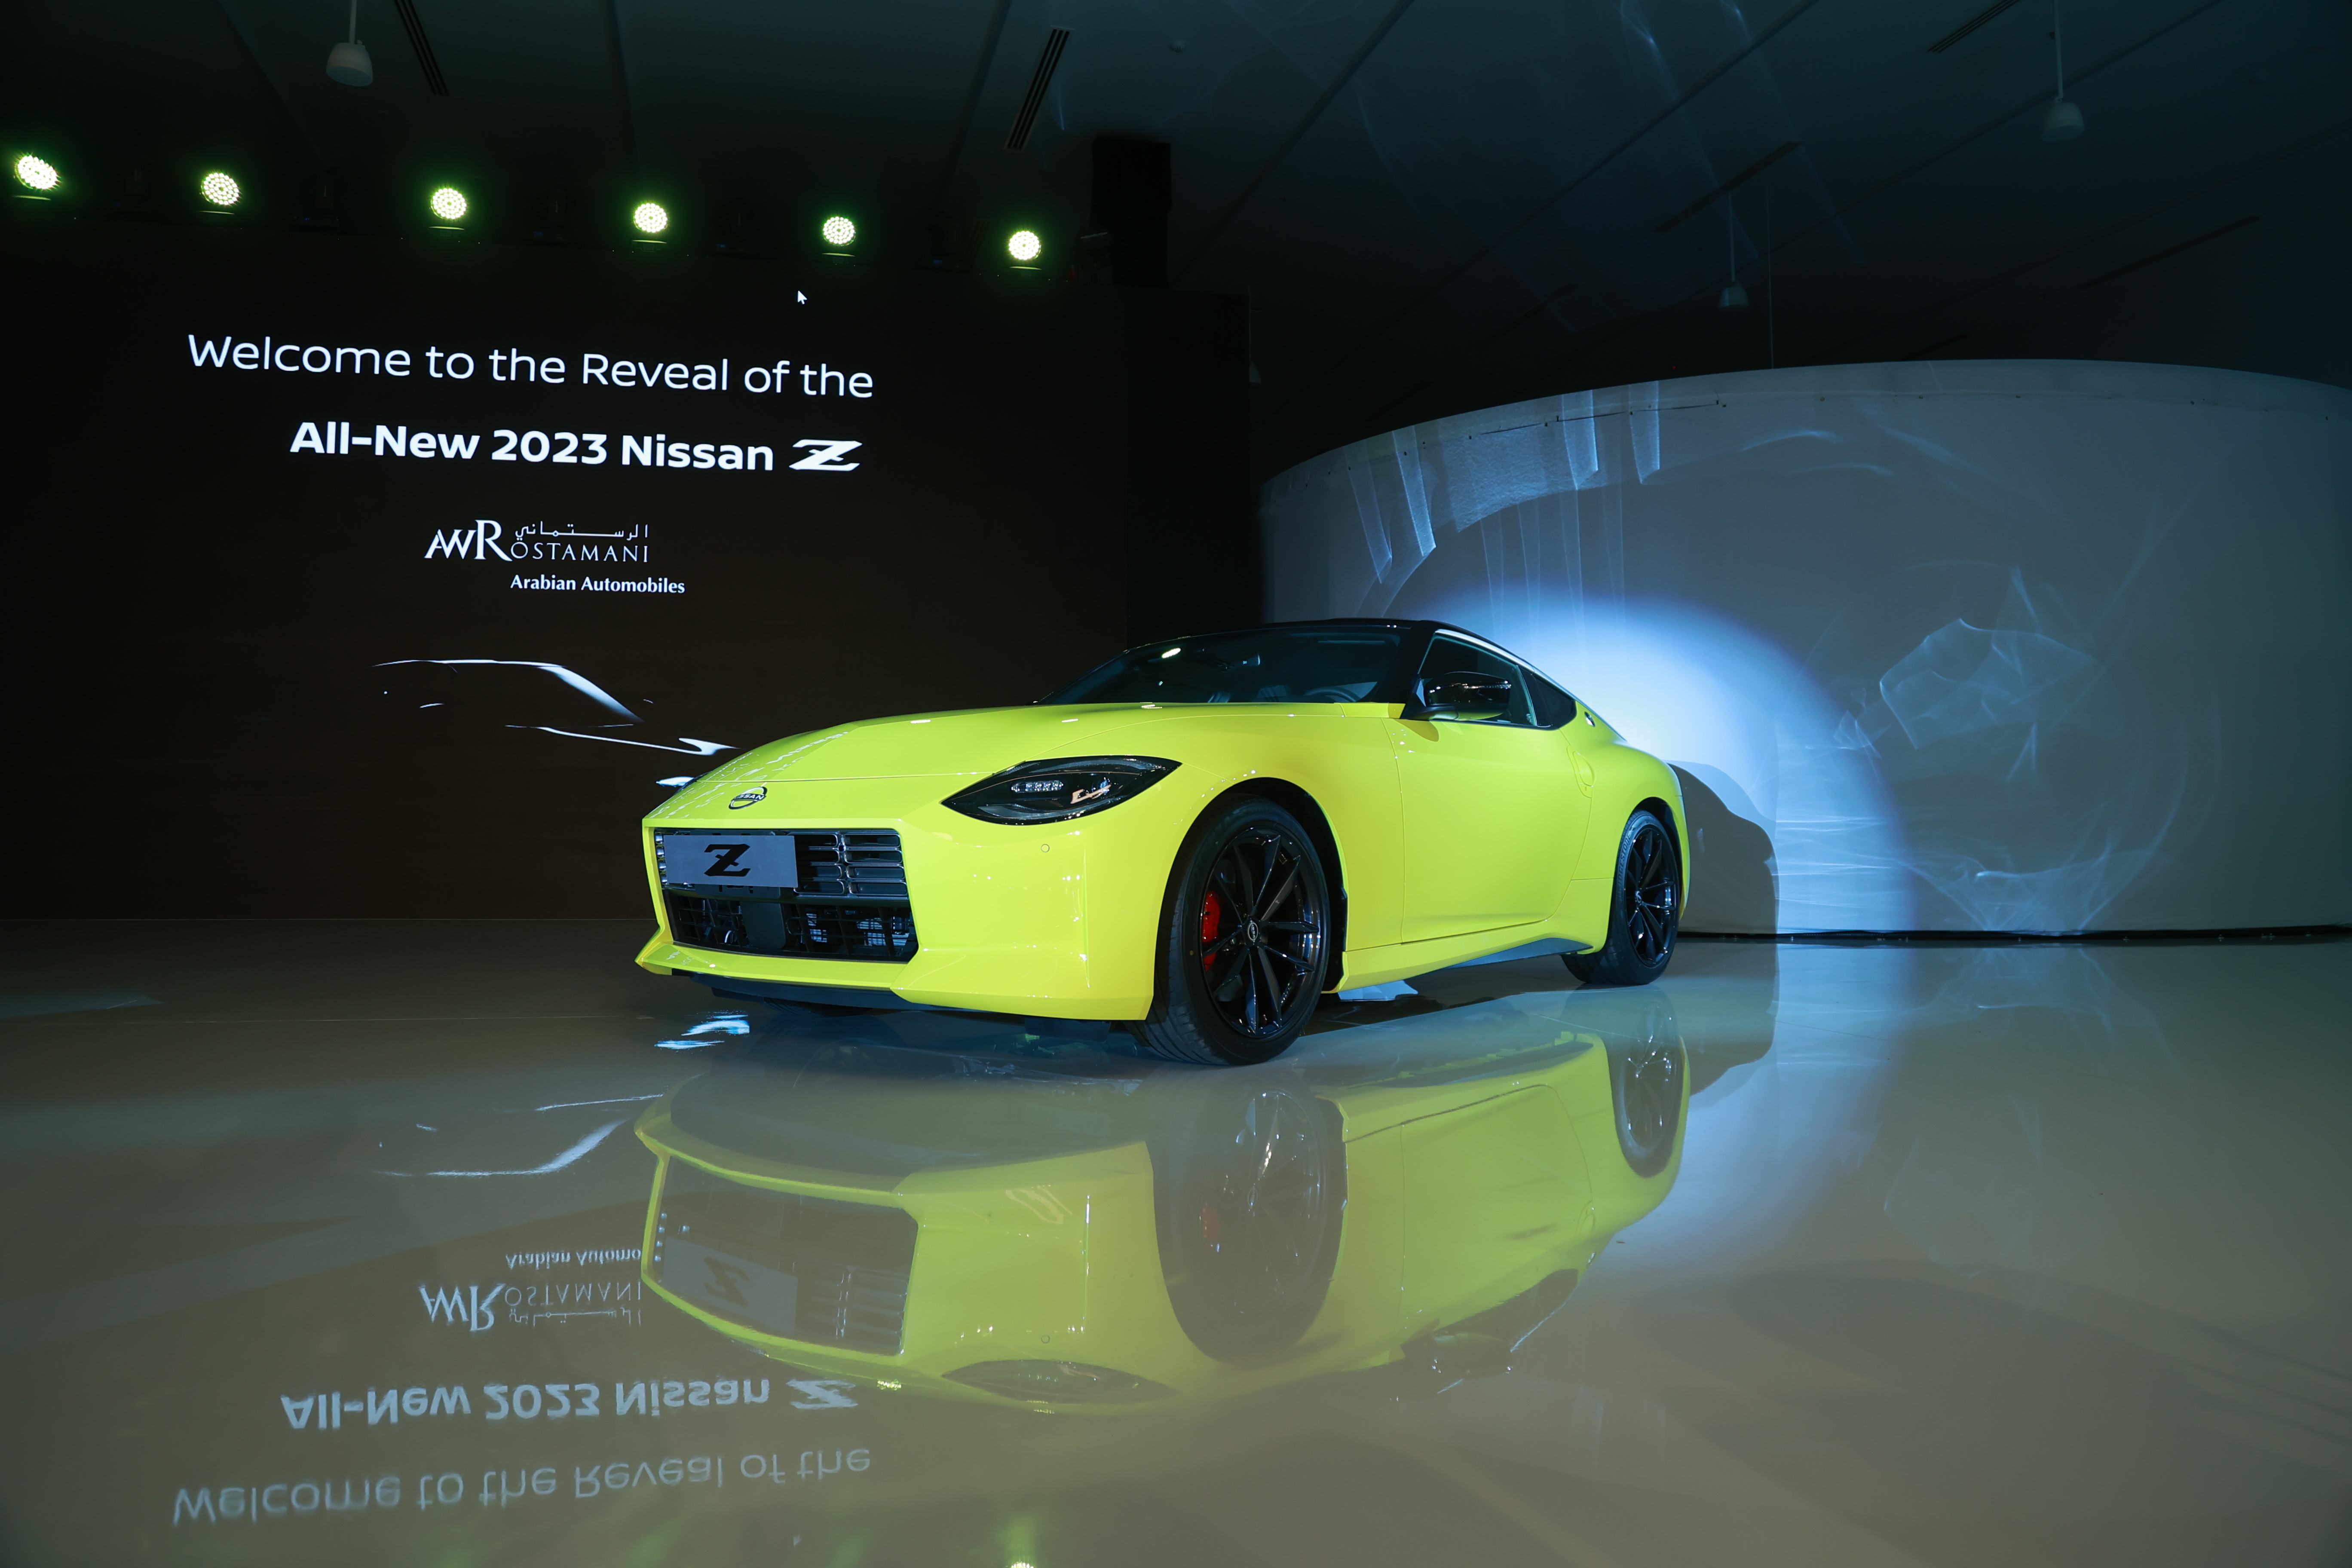 The all-new 2023 Nissan Z, inspired by legacy, incorporates modern built-in technology